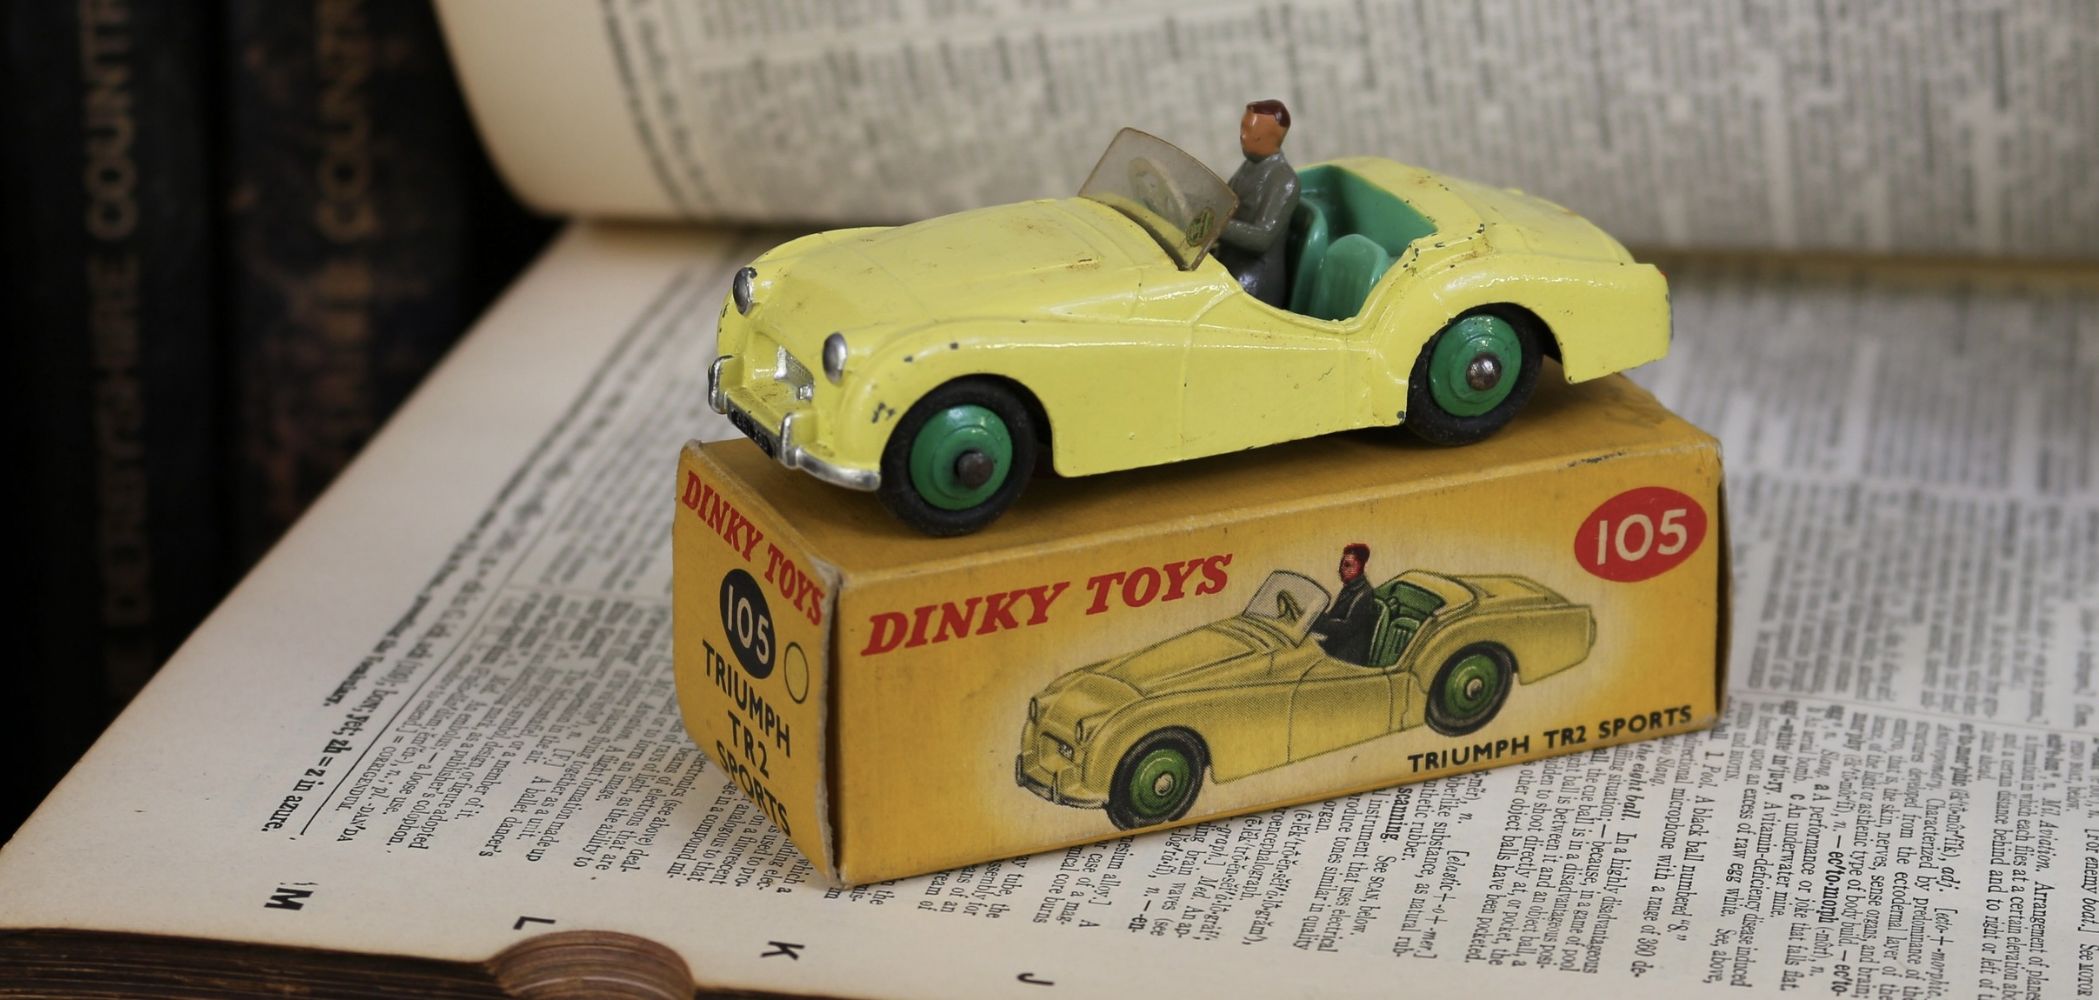 The Toy, Juvenalia, Advertising and Collectors Auction including Comic Books and Sporting Memorabilia